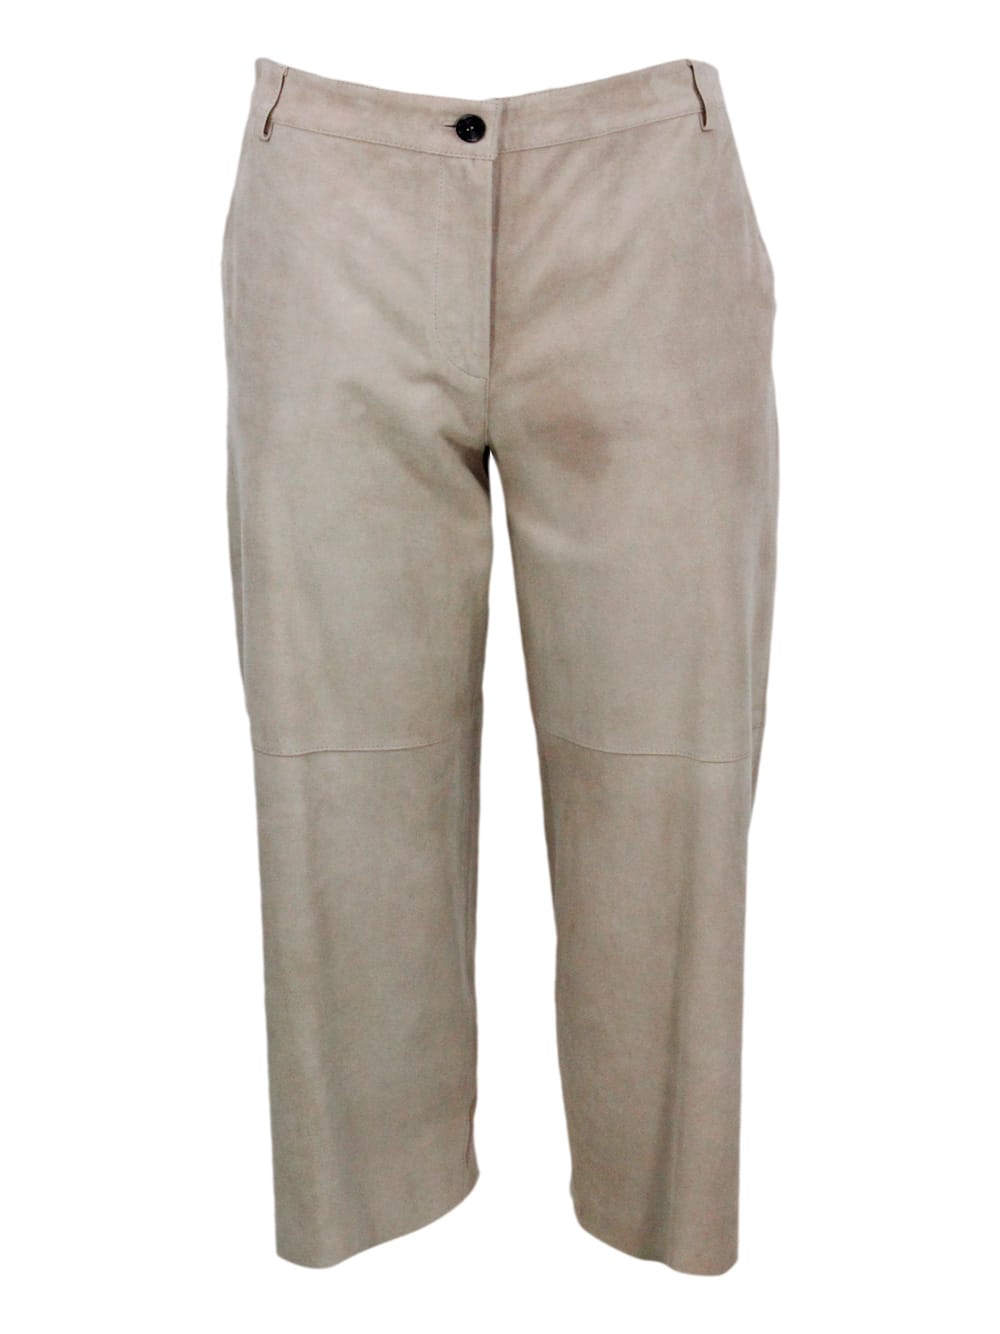 Trousers Made Of Soft Suede, With A Soft Fit And Zip And Button Closure With Elastic Waist On The Back. Welt Pockets.